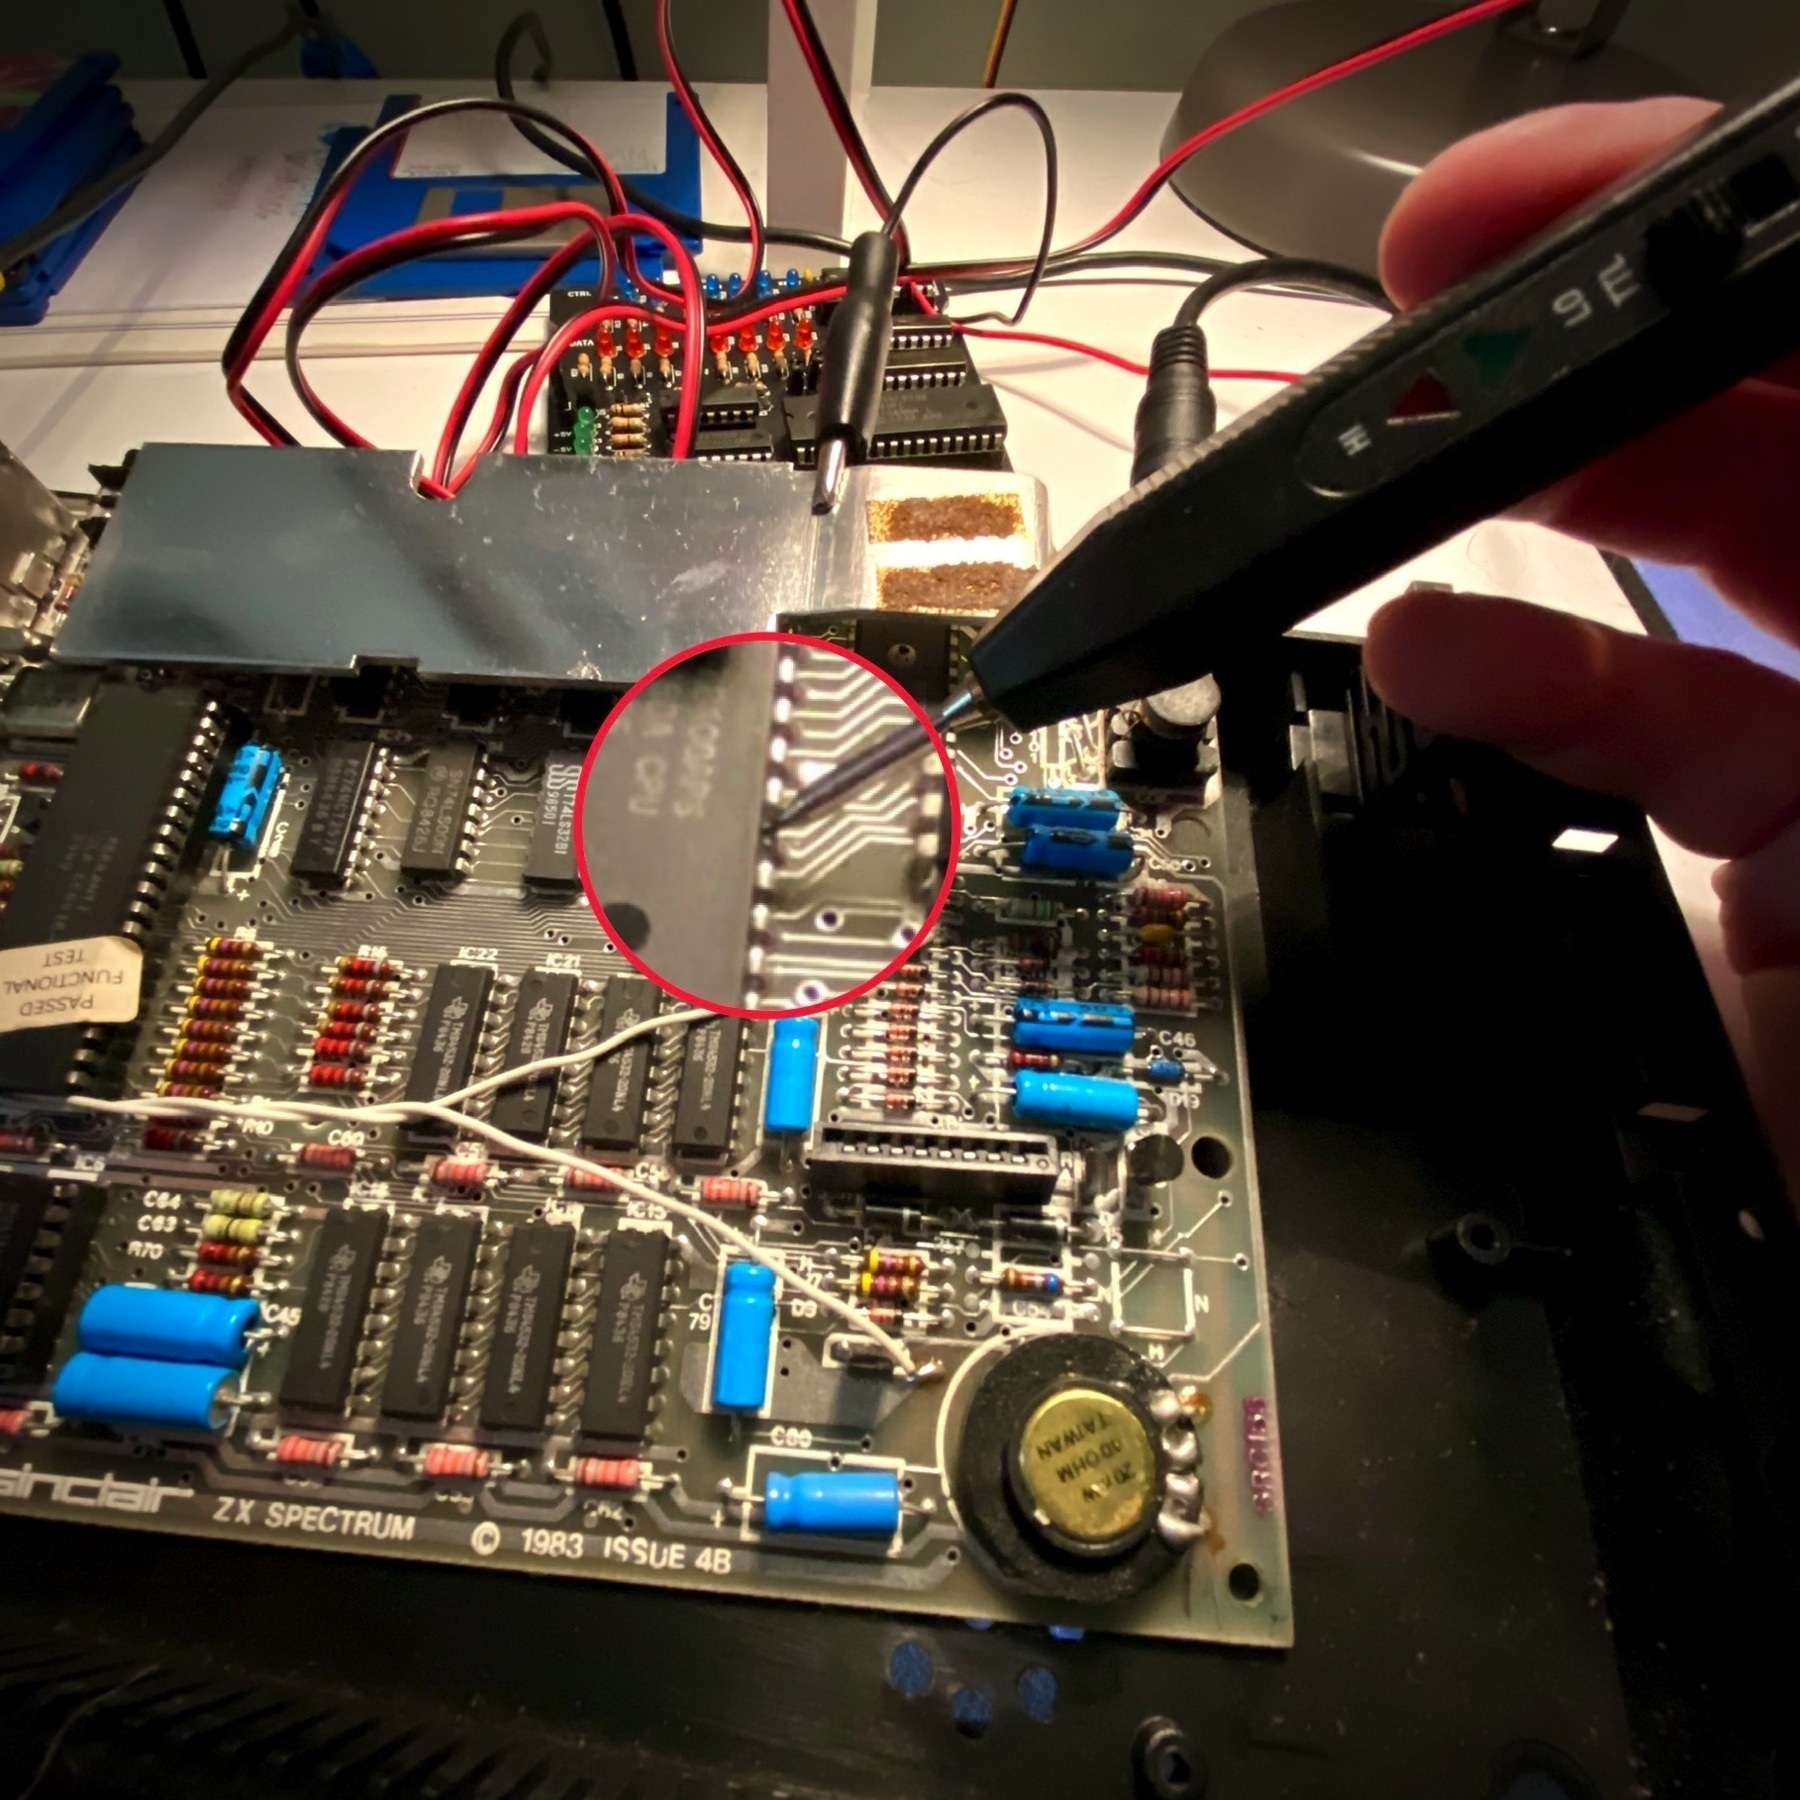 ZX Spectrum motherboard. The Z80 processor is being examined with a logic probe, but the probe is showing no activity.